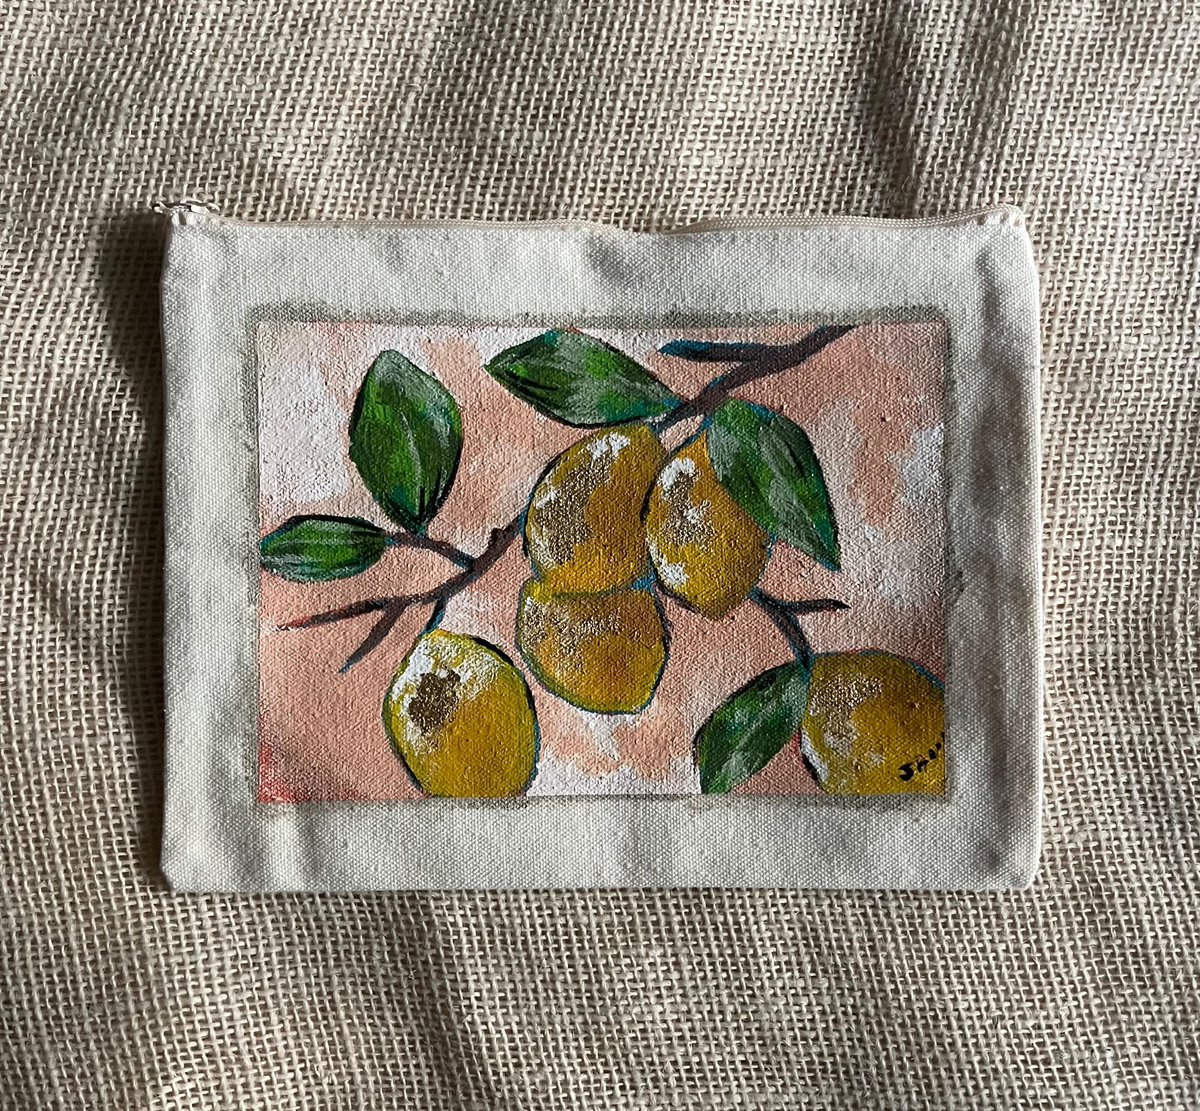 More lemons on pouches! lol , they will be added to my shop soon. Link to shop in Bio #art #artist #arts #artistsoninstagram #artgallery #craft #painting #paintings #painter #artoftheday #lemon #foodart #impressionism #pouch #pouches #canvas #canvaspainting #canvasart